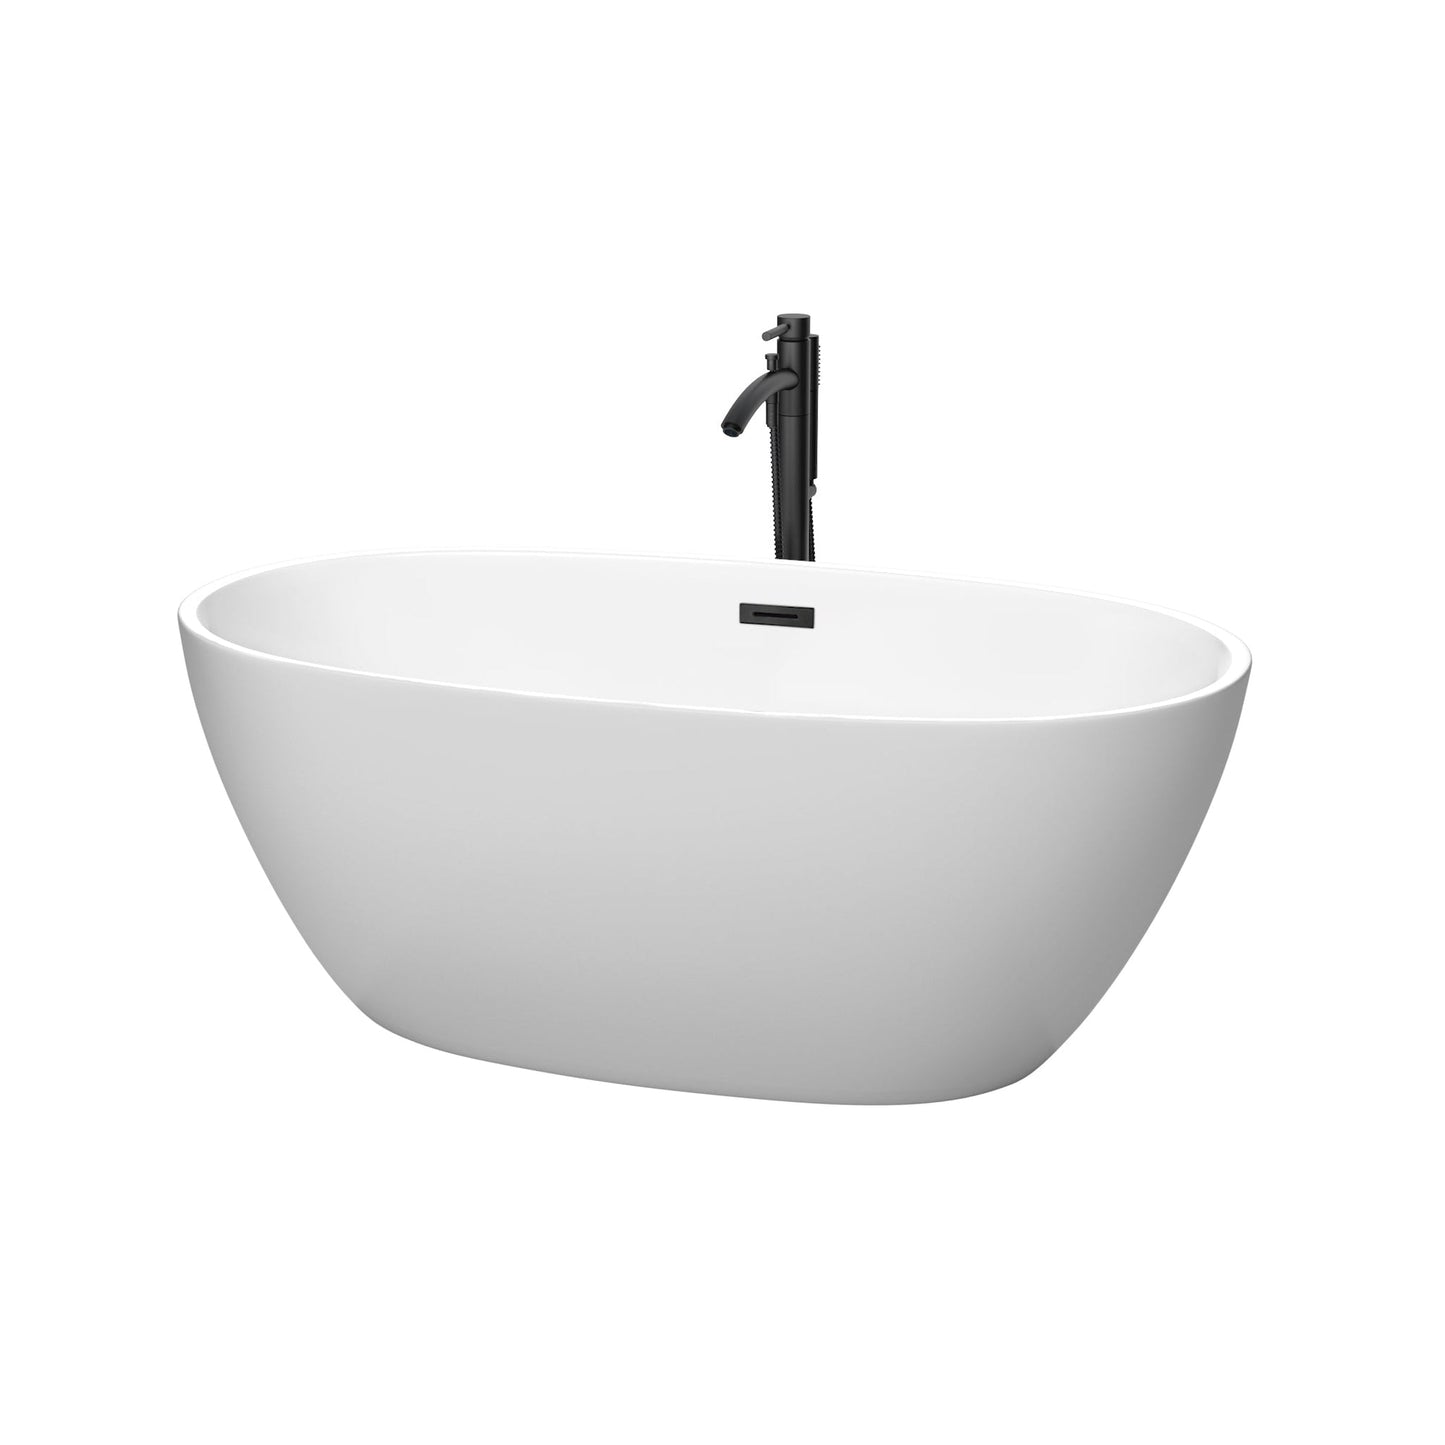 Wyndham Collection Juno 59" Freestanding Bathtub in Matte White With Floor Mounted Faucet, Drain and Overflow Trim in Matte Black